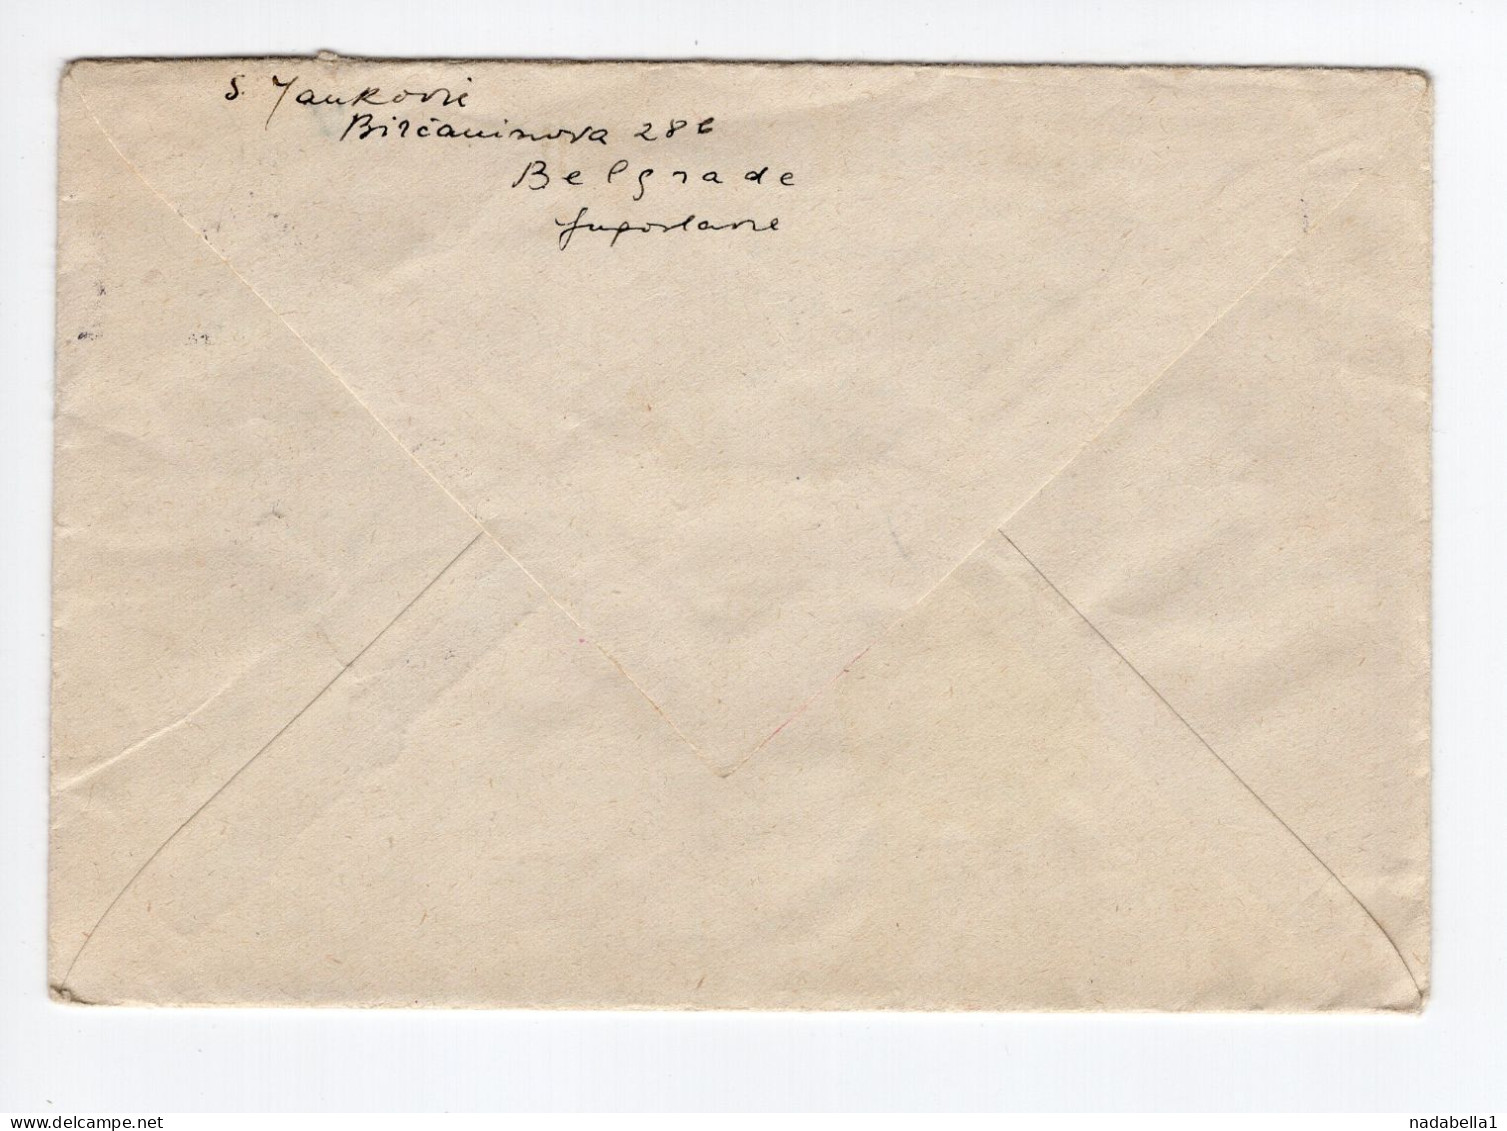 1957. YUGOSLAVIA,SERBIA,BELGRADE,AIRMAIL COVER TO LONDON,GREAT BRITAIN,LETTER INSIDE - Aéreo